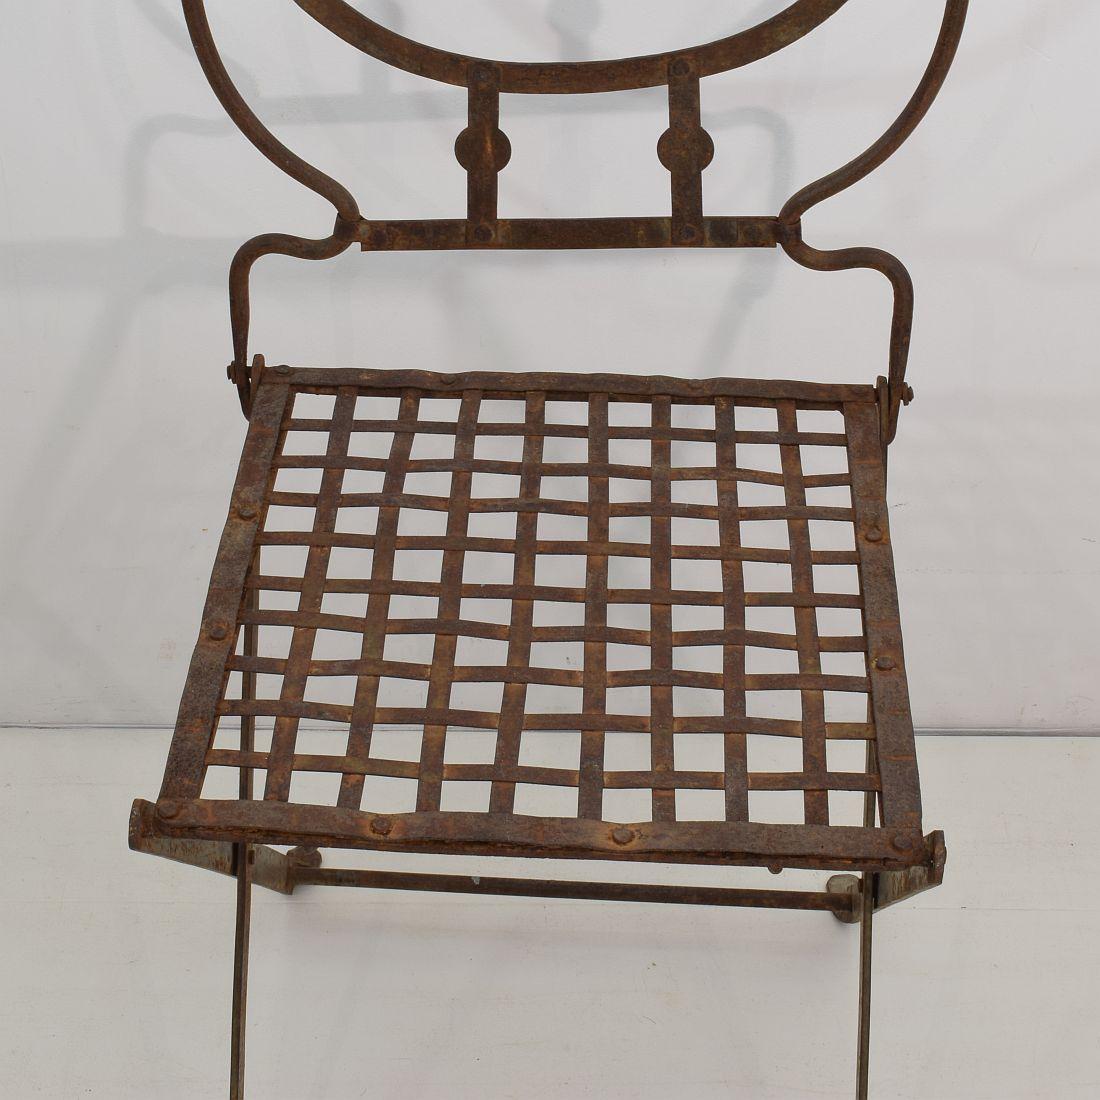 Pair of 19th Century French Iron Folding Garden Chairs with Small Table/Stool 3